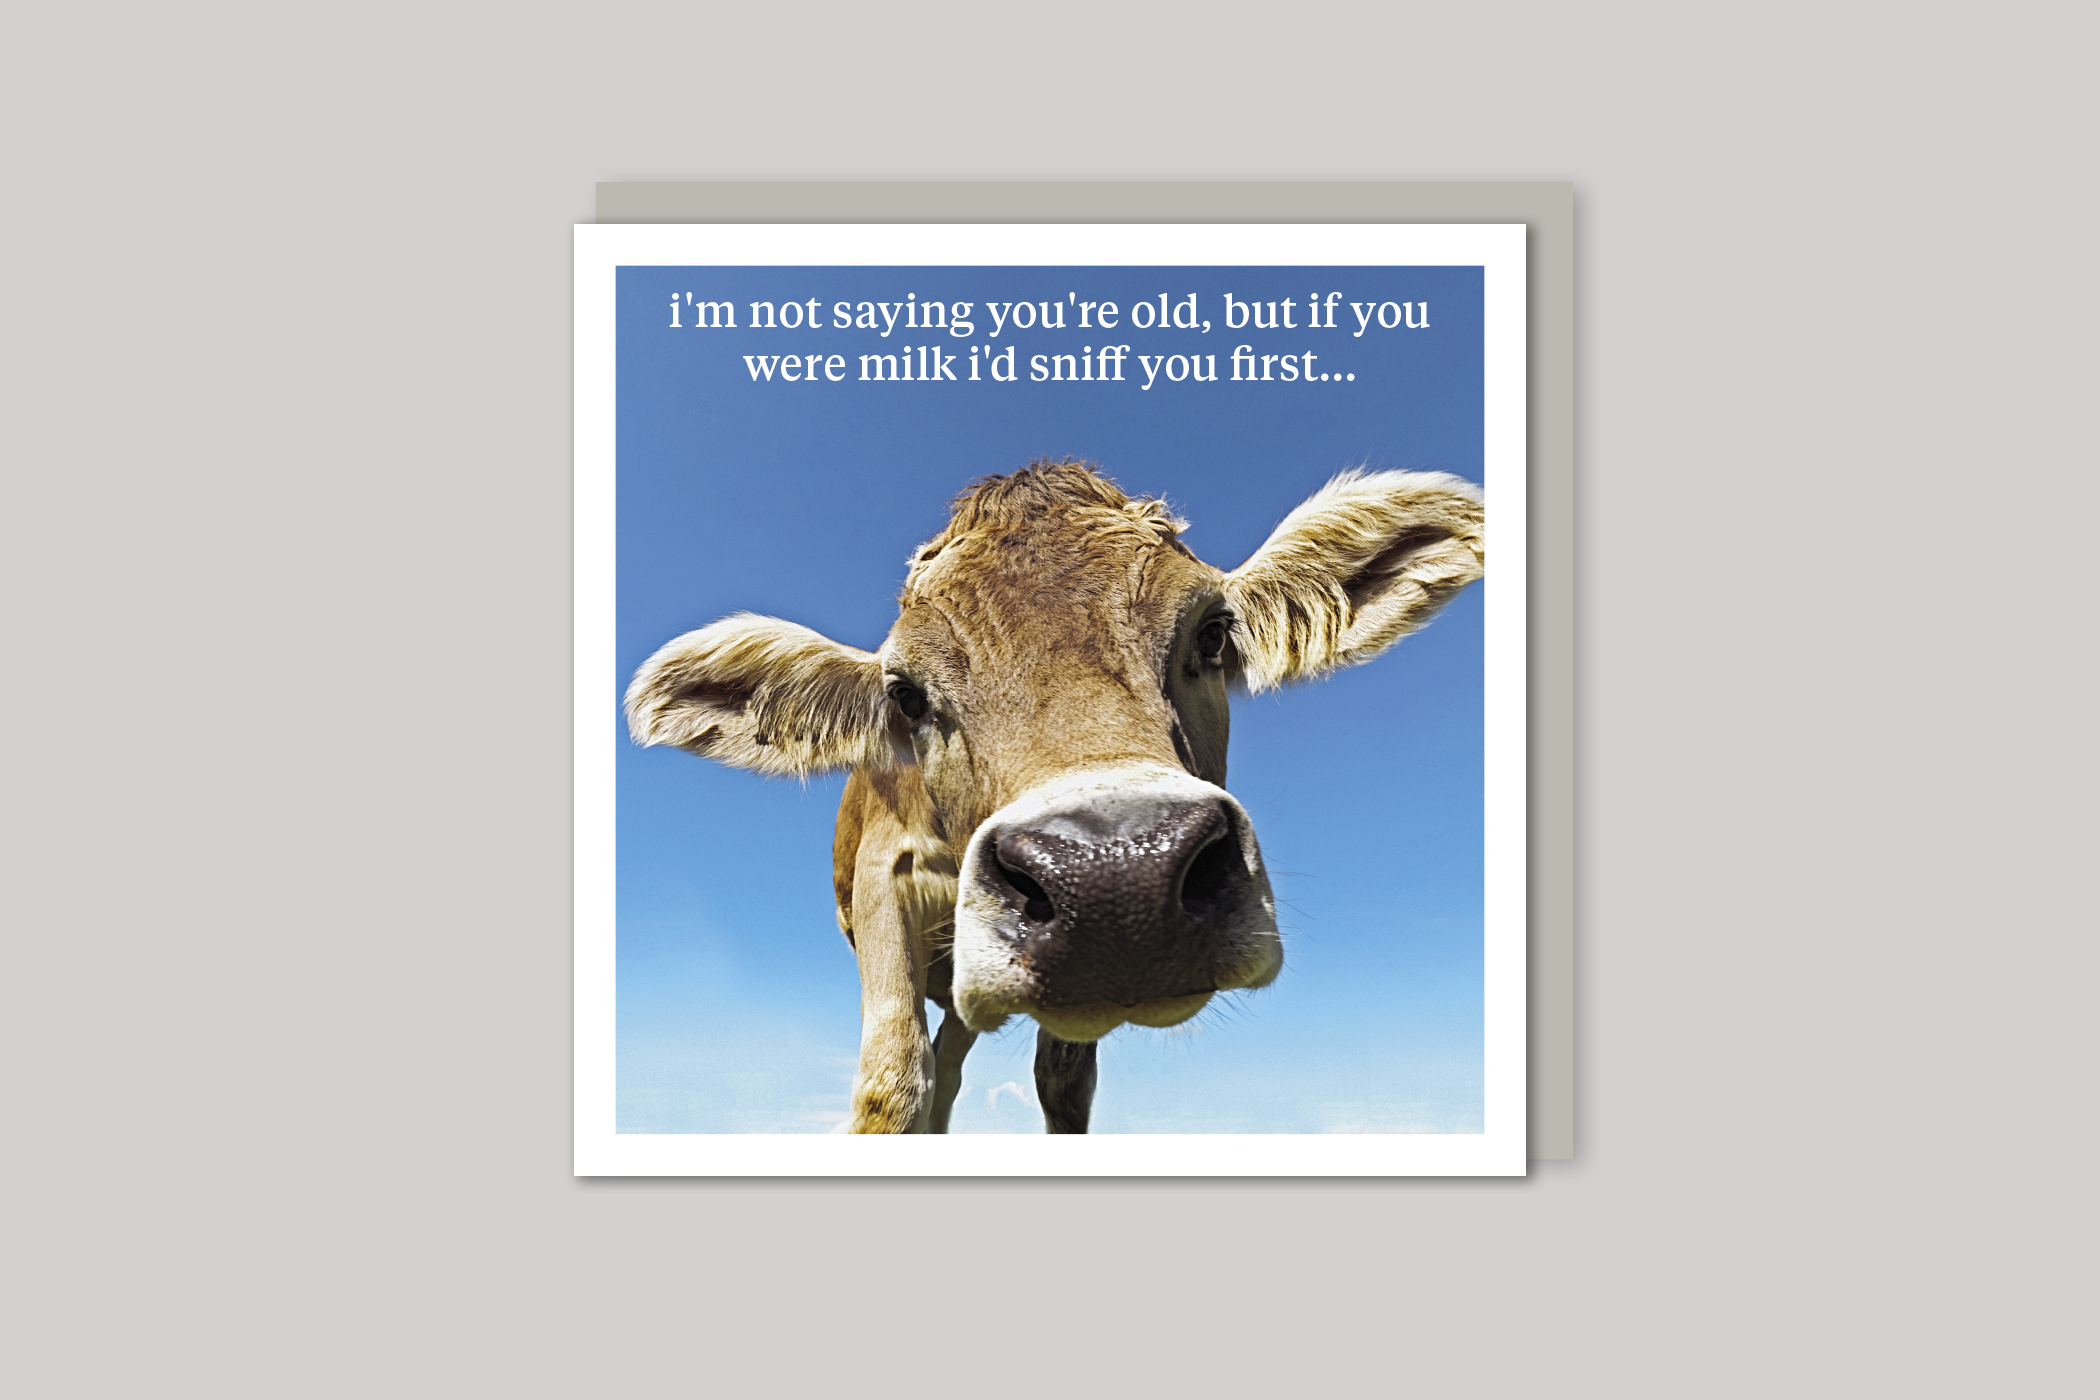 If You Were Milk quirky animal portrait from Curious World range of greeting cards by Icon, back page.